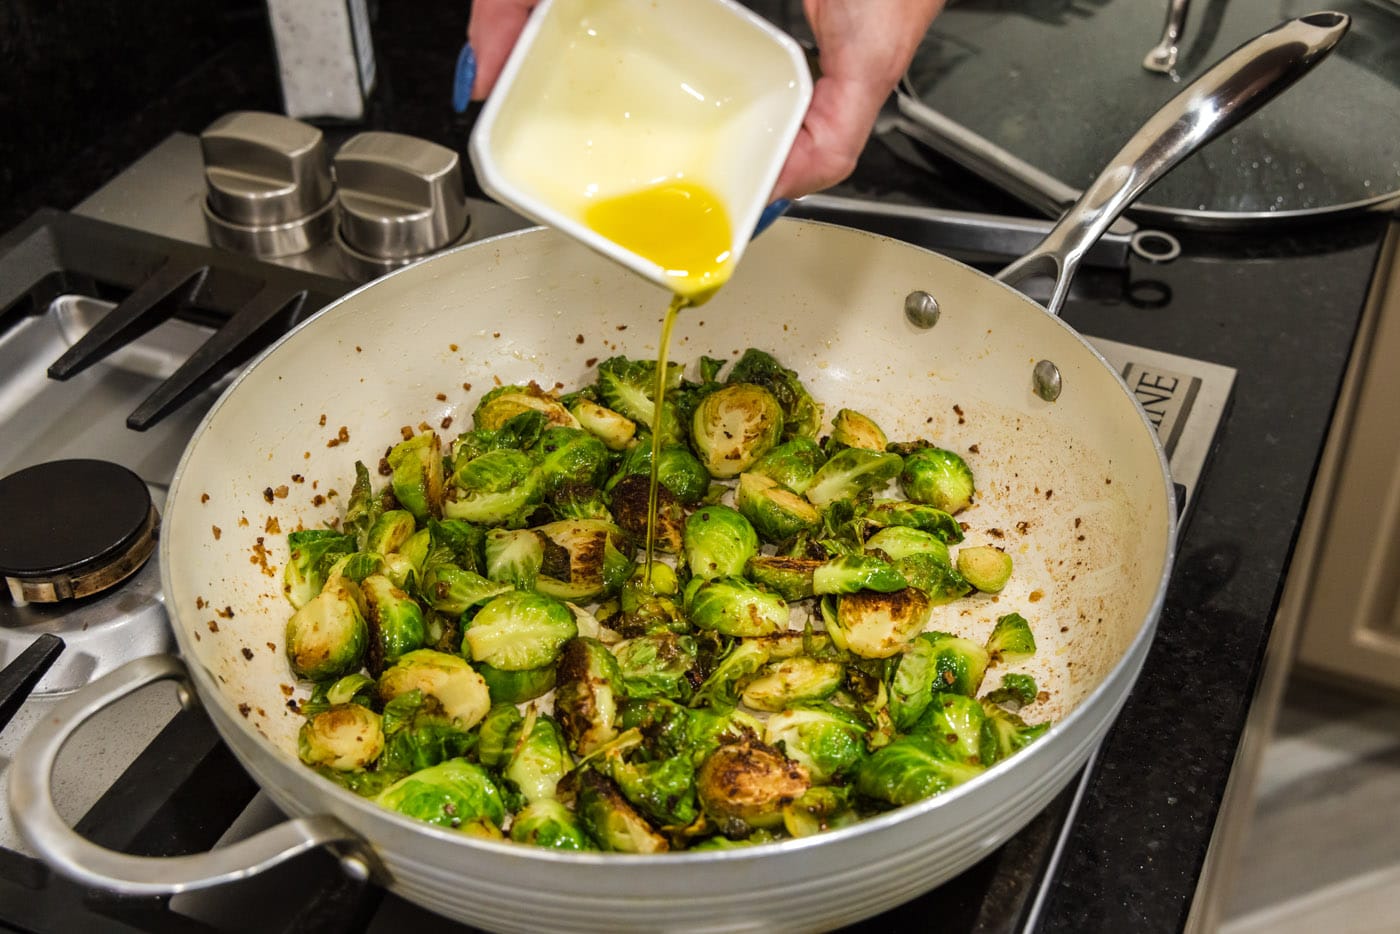 pouring oil into brussels sprouts in a skillet